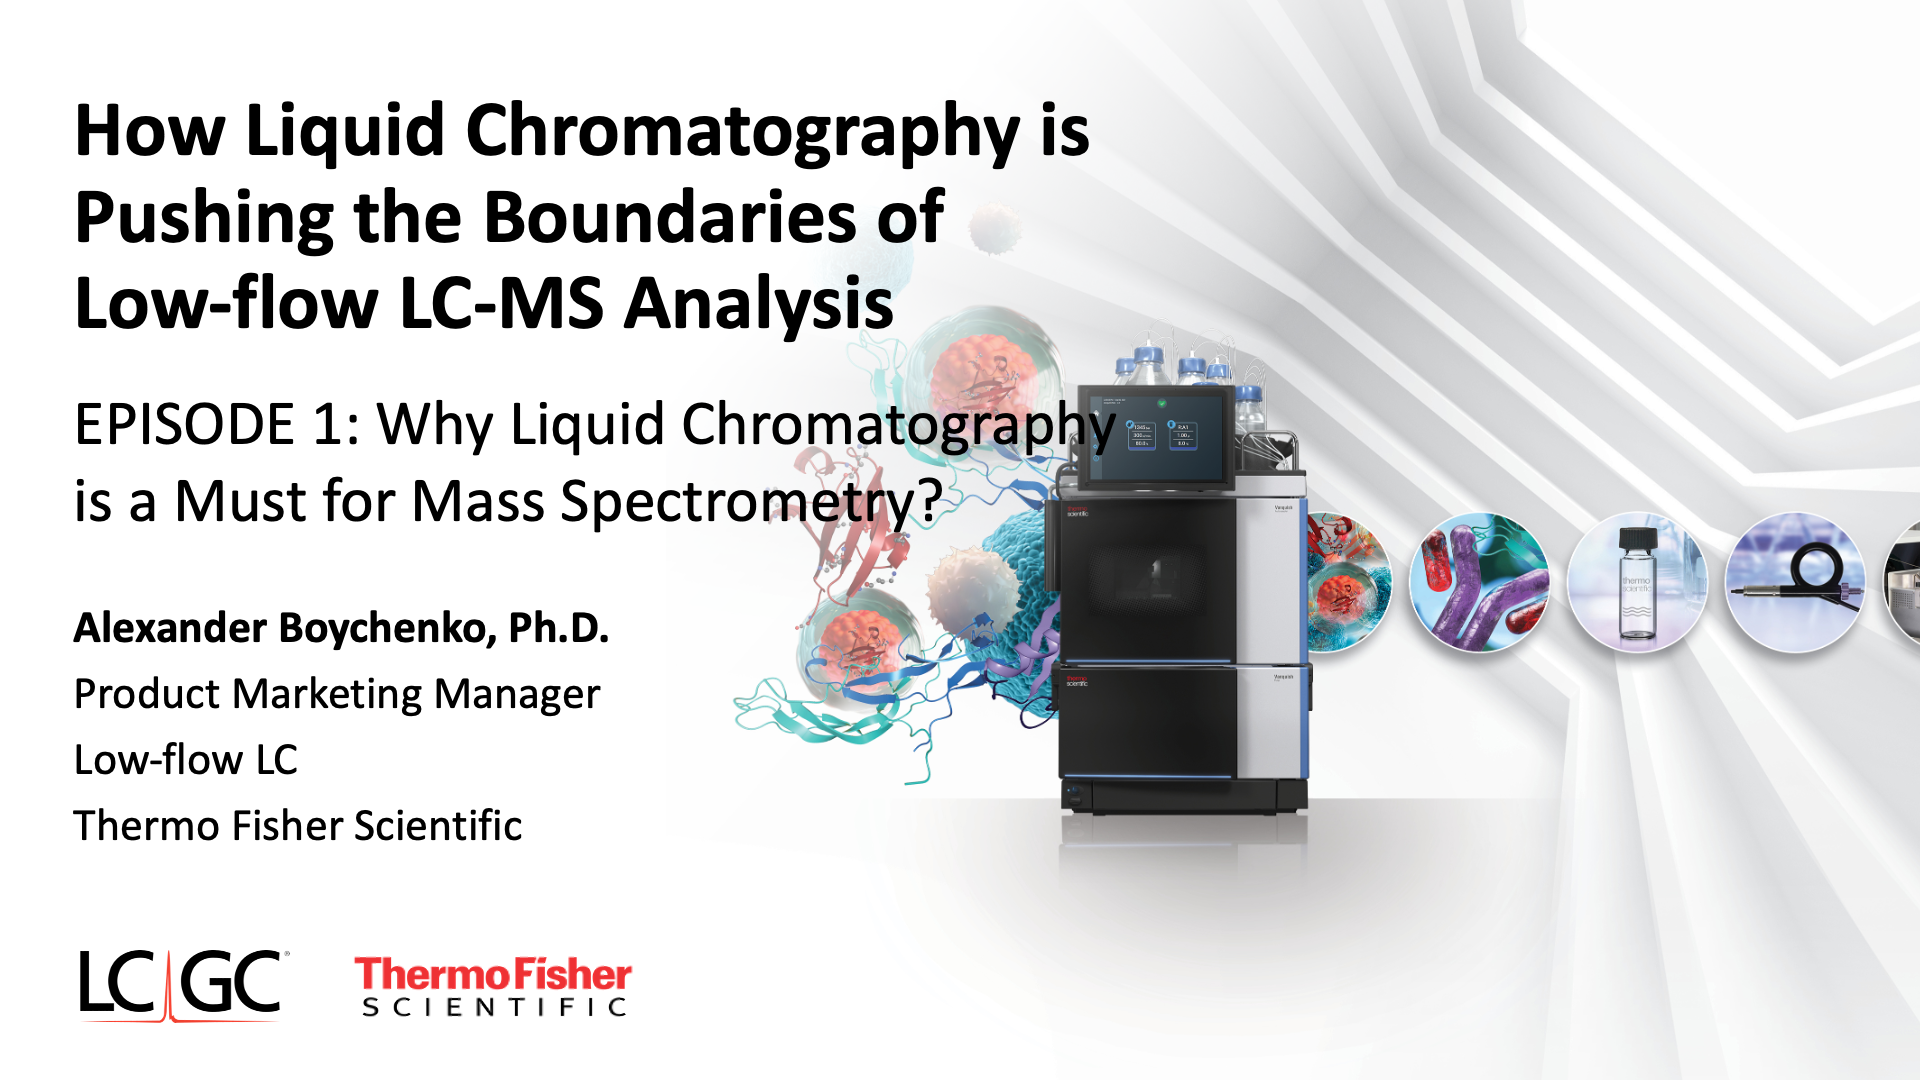 Why Liquid Chromatography is a Must for Mass Spectrometry?